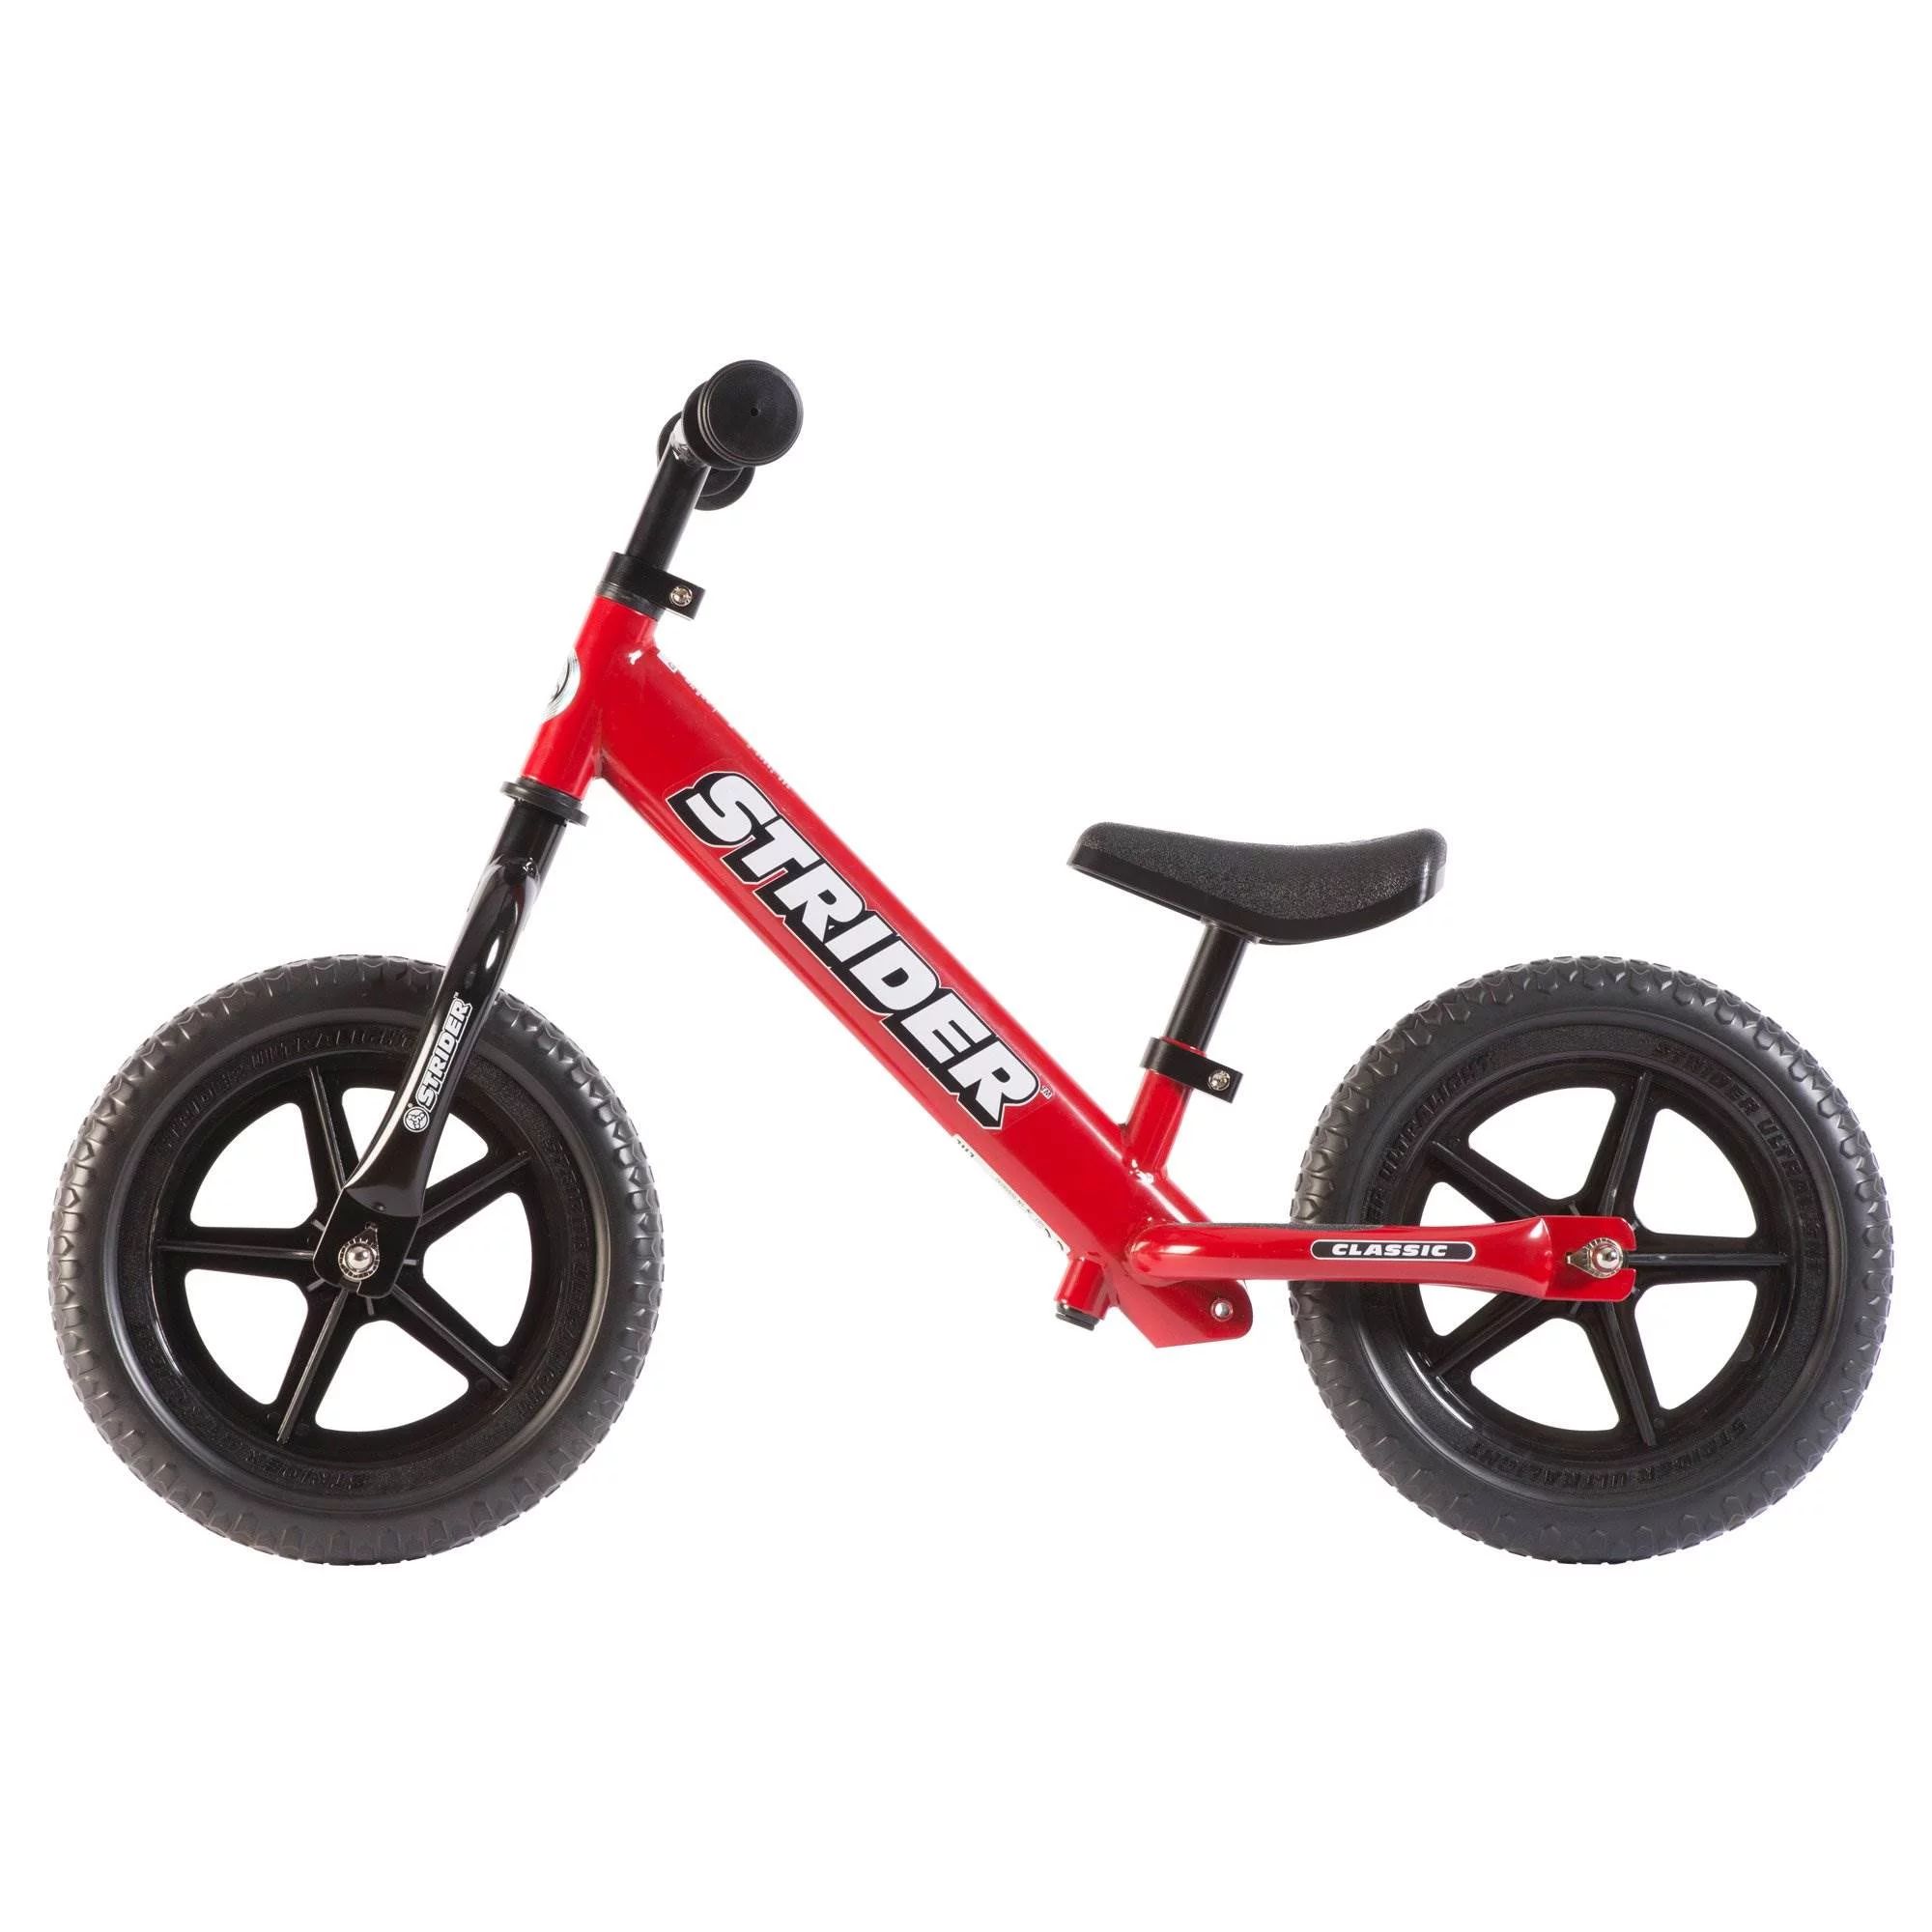 Strider 12 Classic Entry Balance Bike for Toddler Kids 18 - 36 Months Old, Red | Walmart (US)